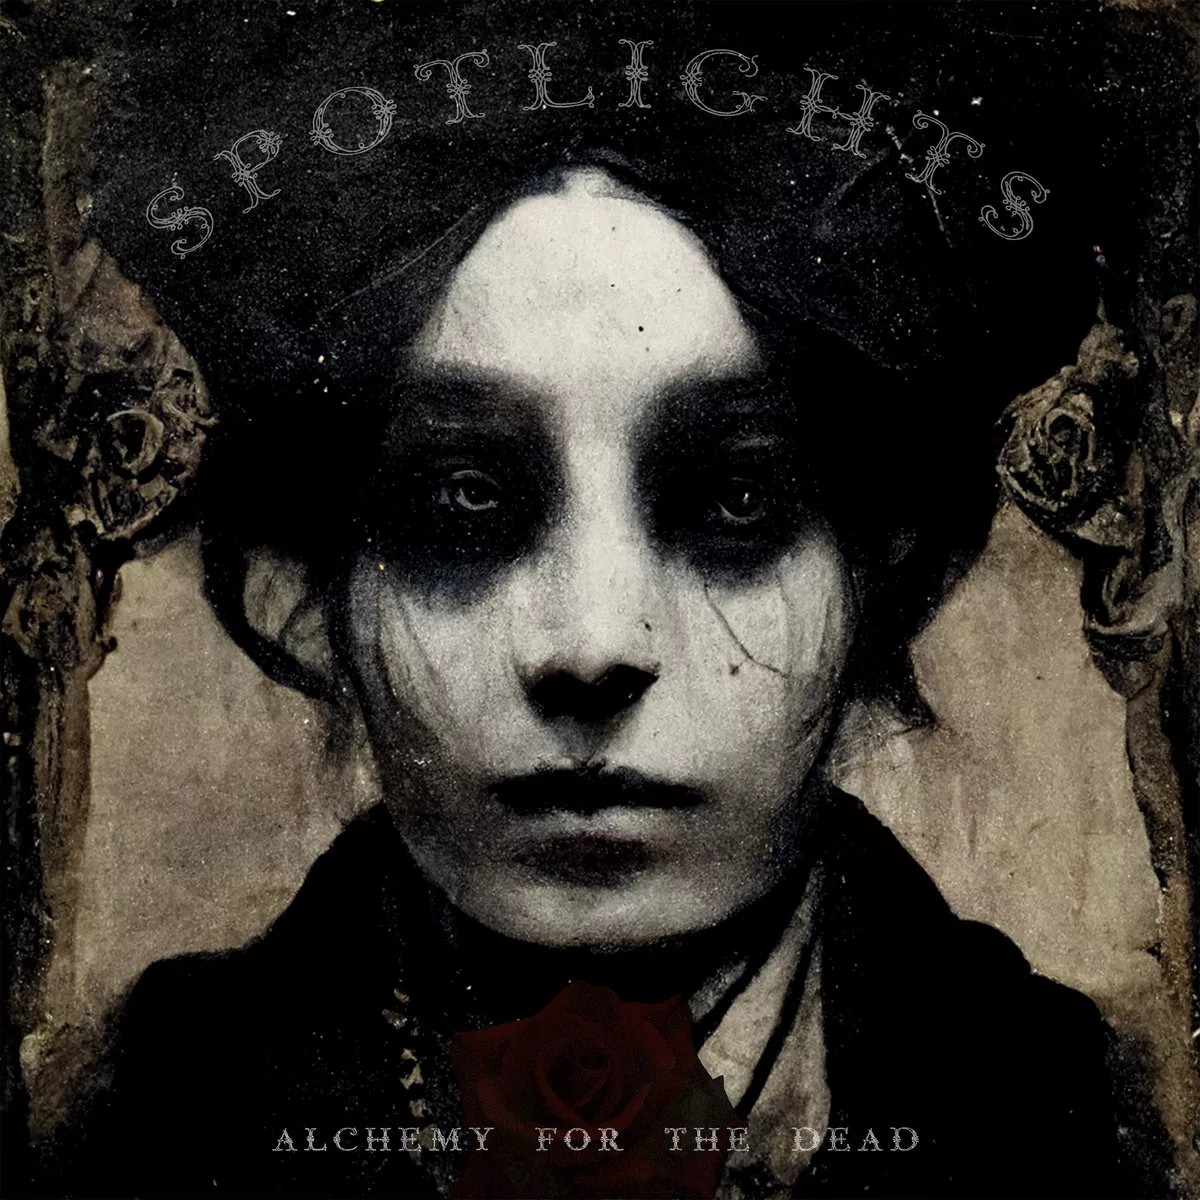 Alchemy for the Dead - Spotlights